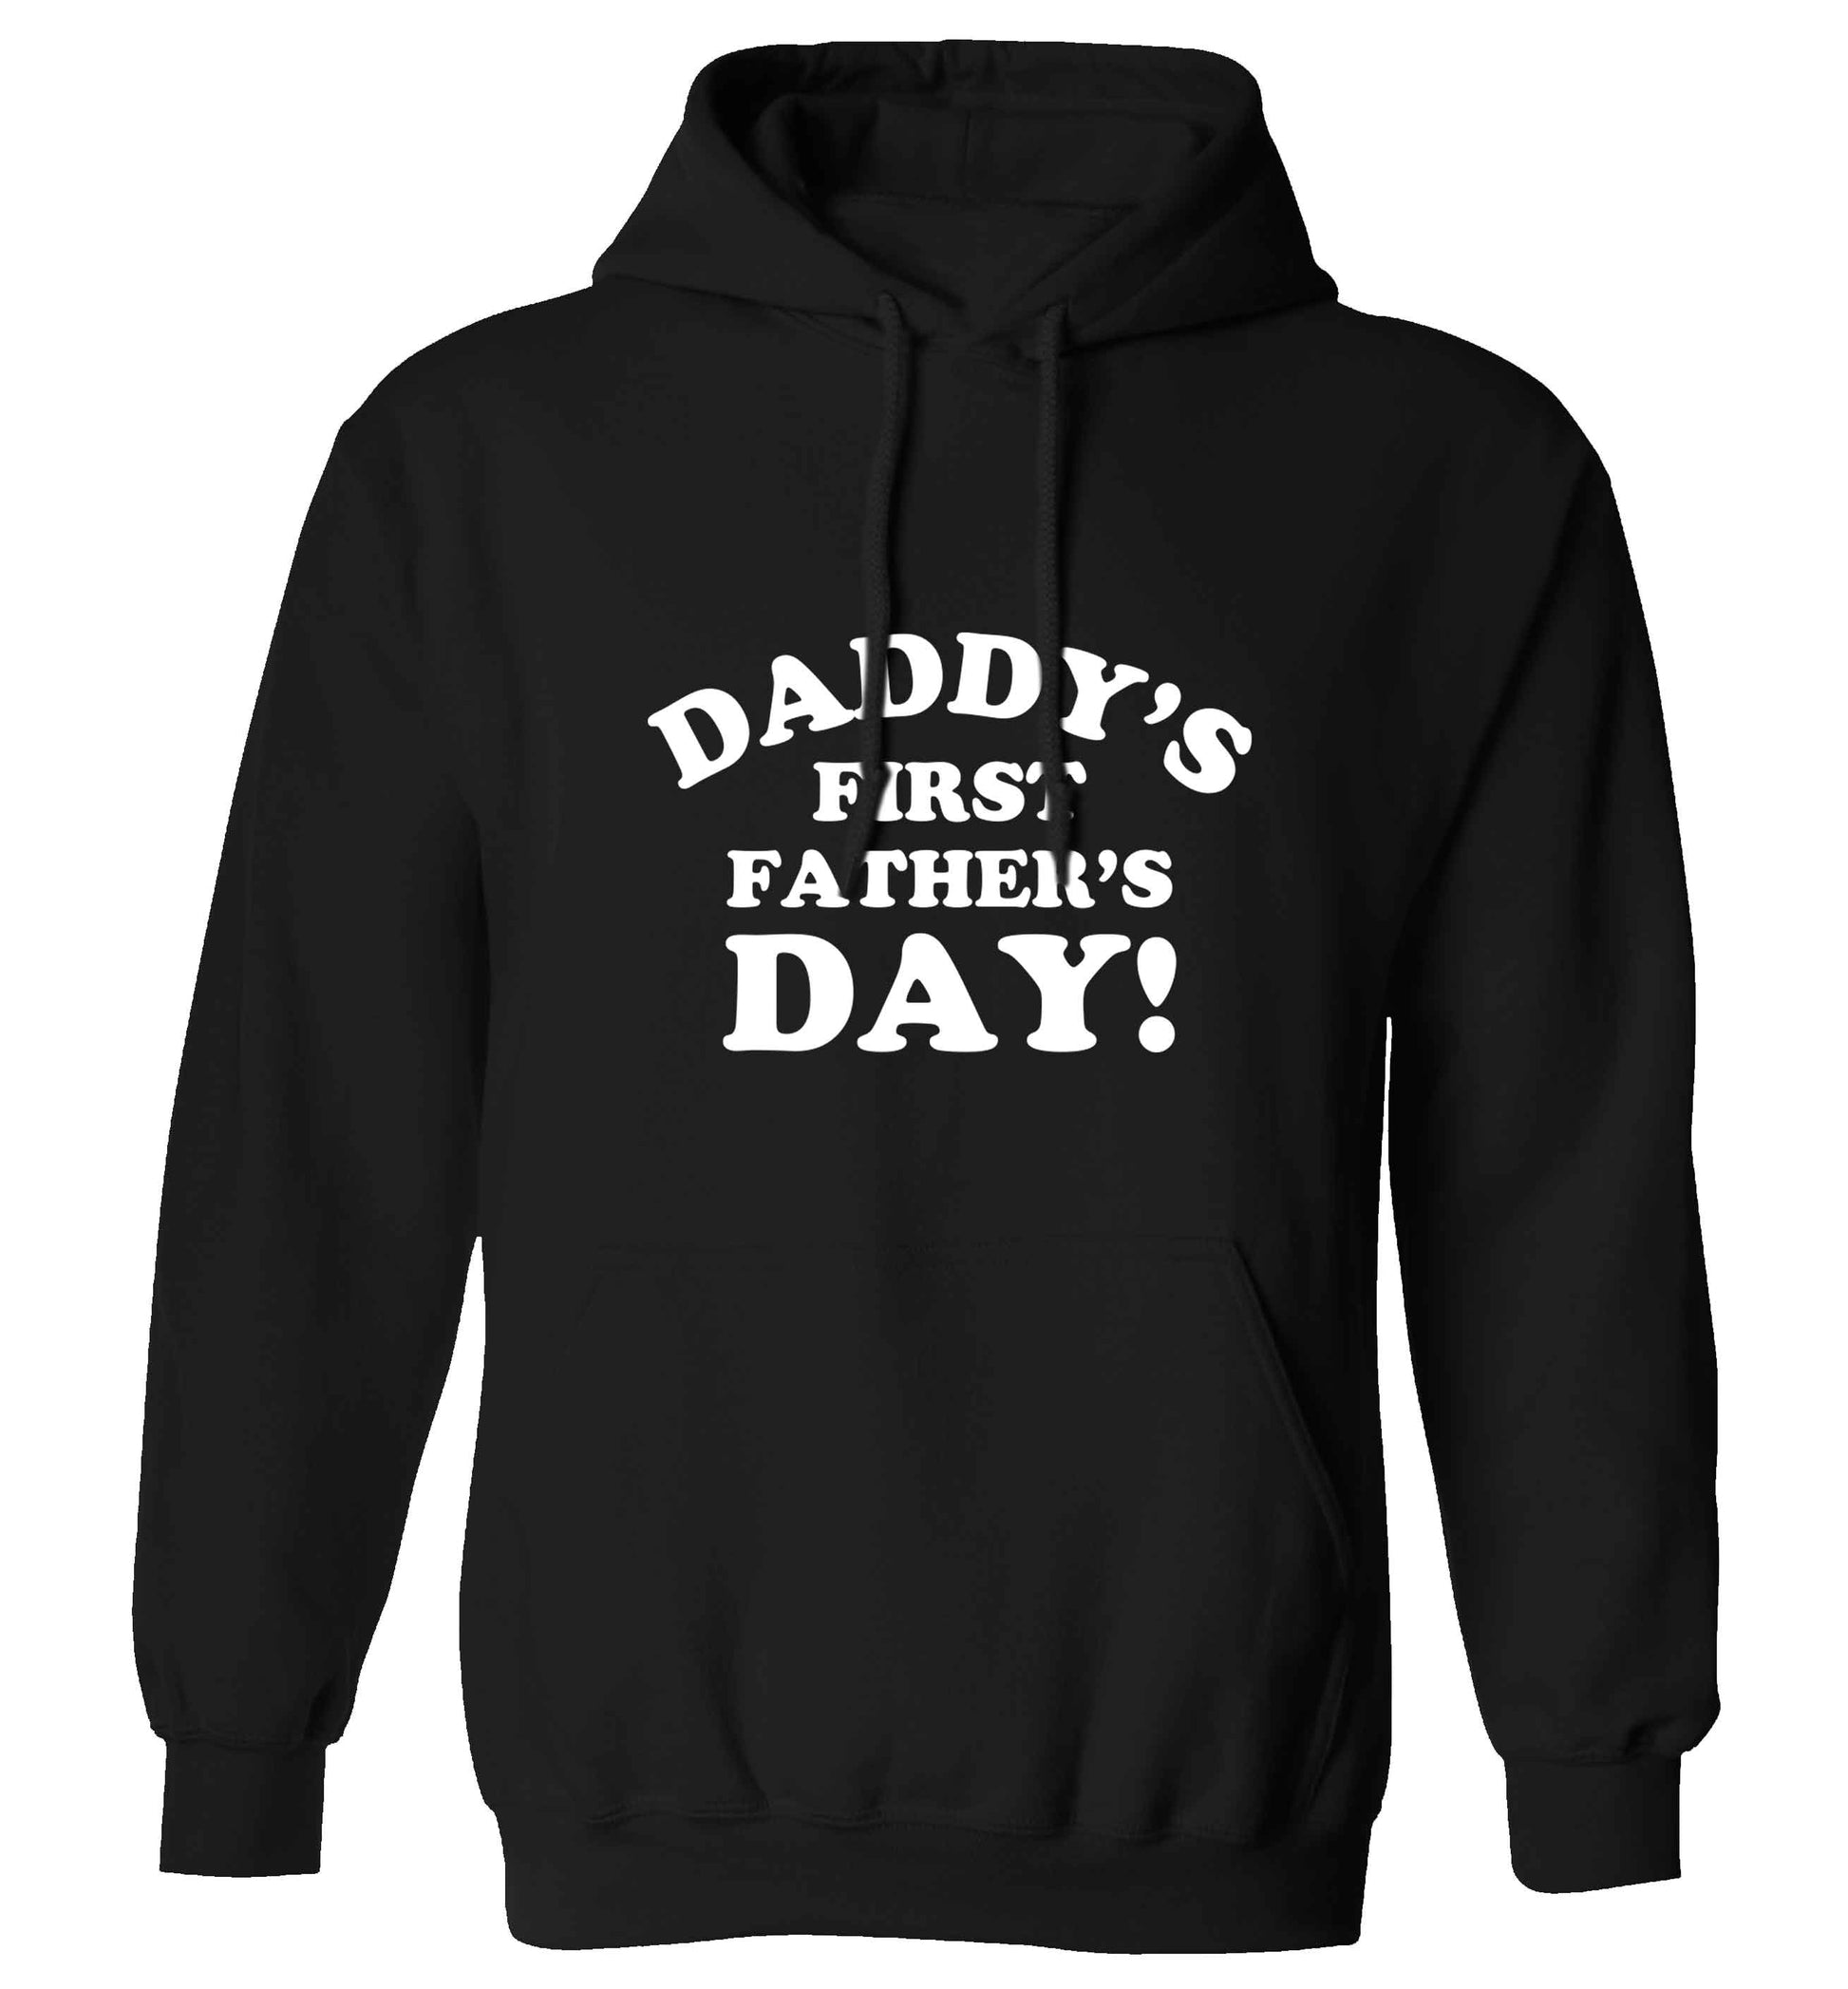 Daddy's first father's day adults unisex black hoodie 2XL